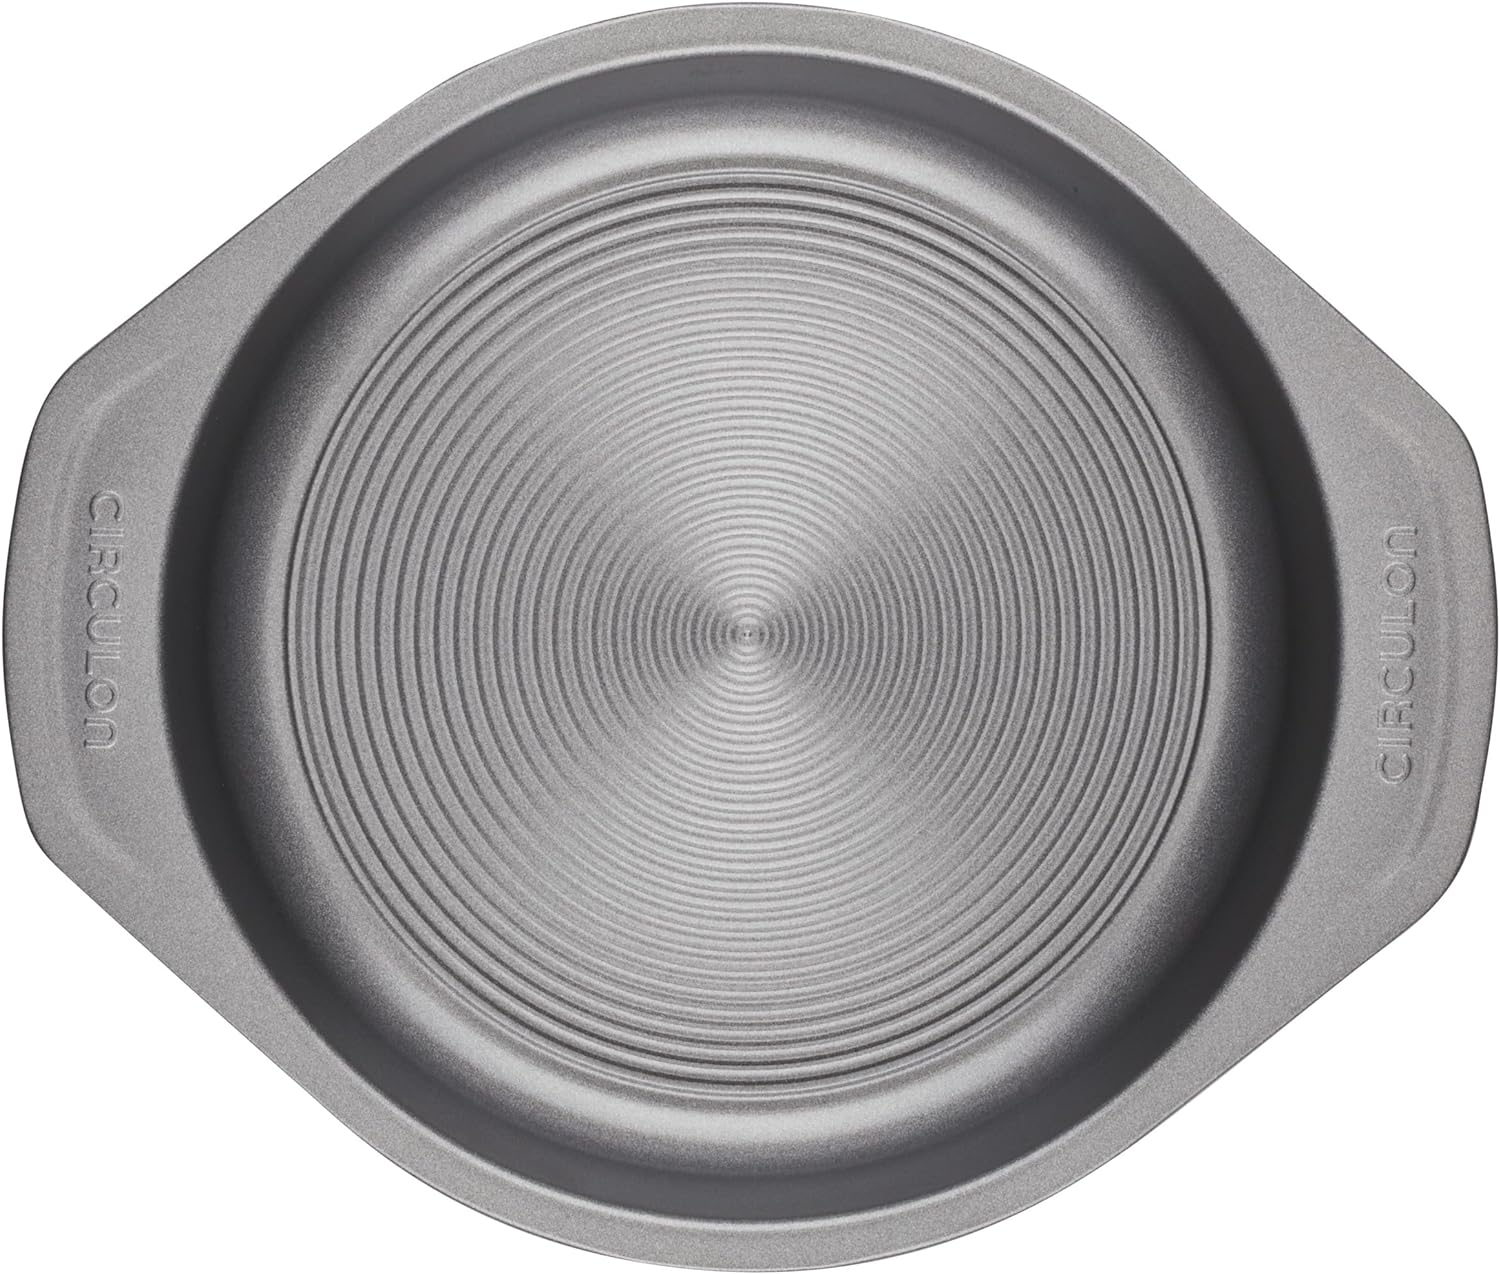 Circulon Nonstick Bakeware Cake Pan with Lid, 9-Inch x 13-Inch